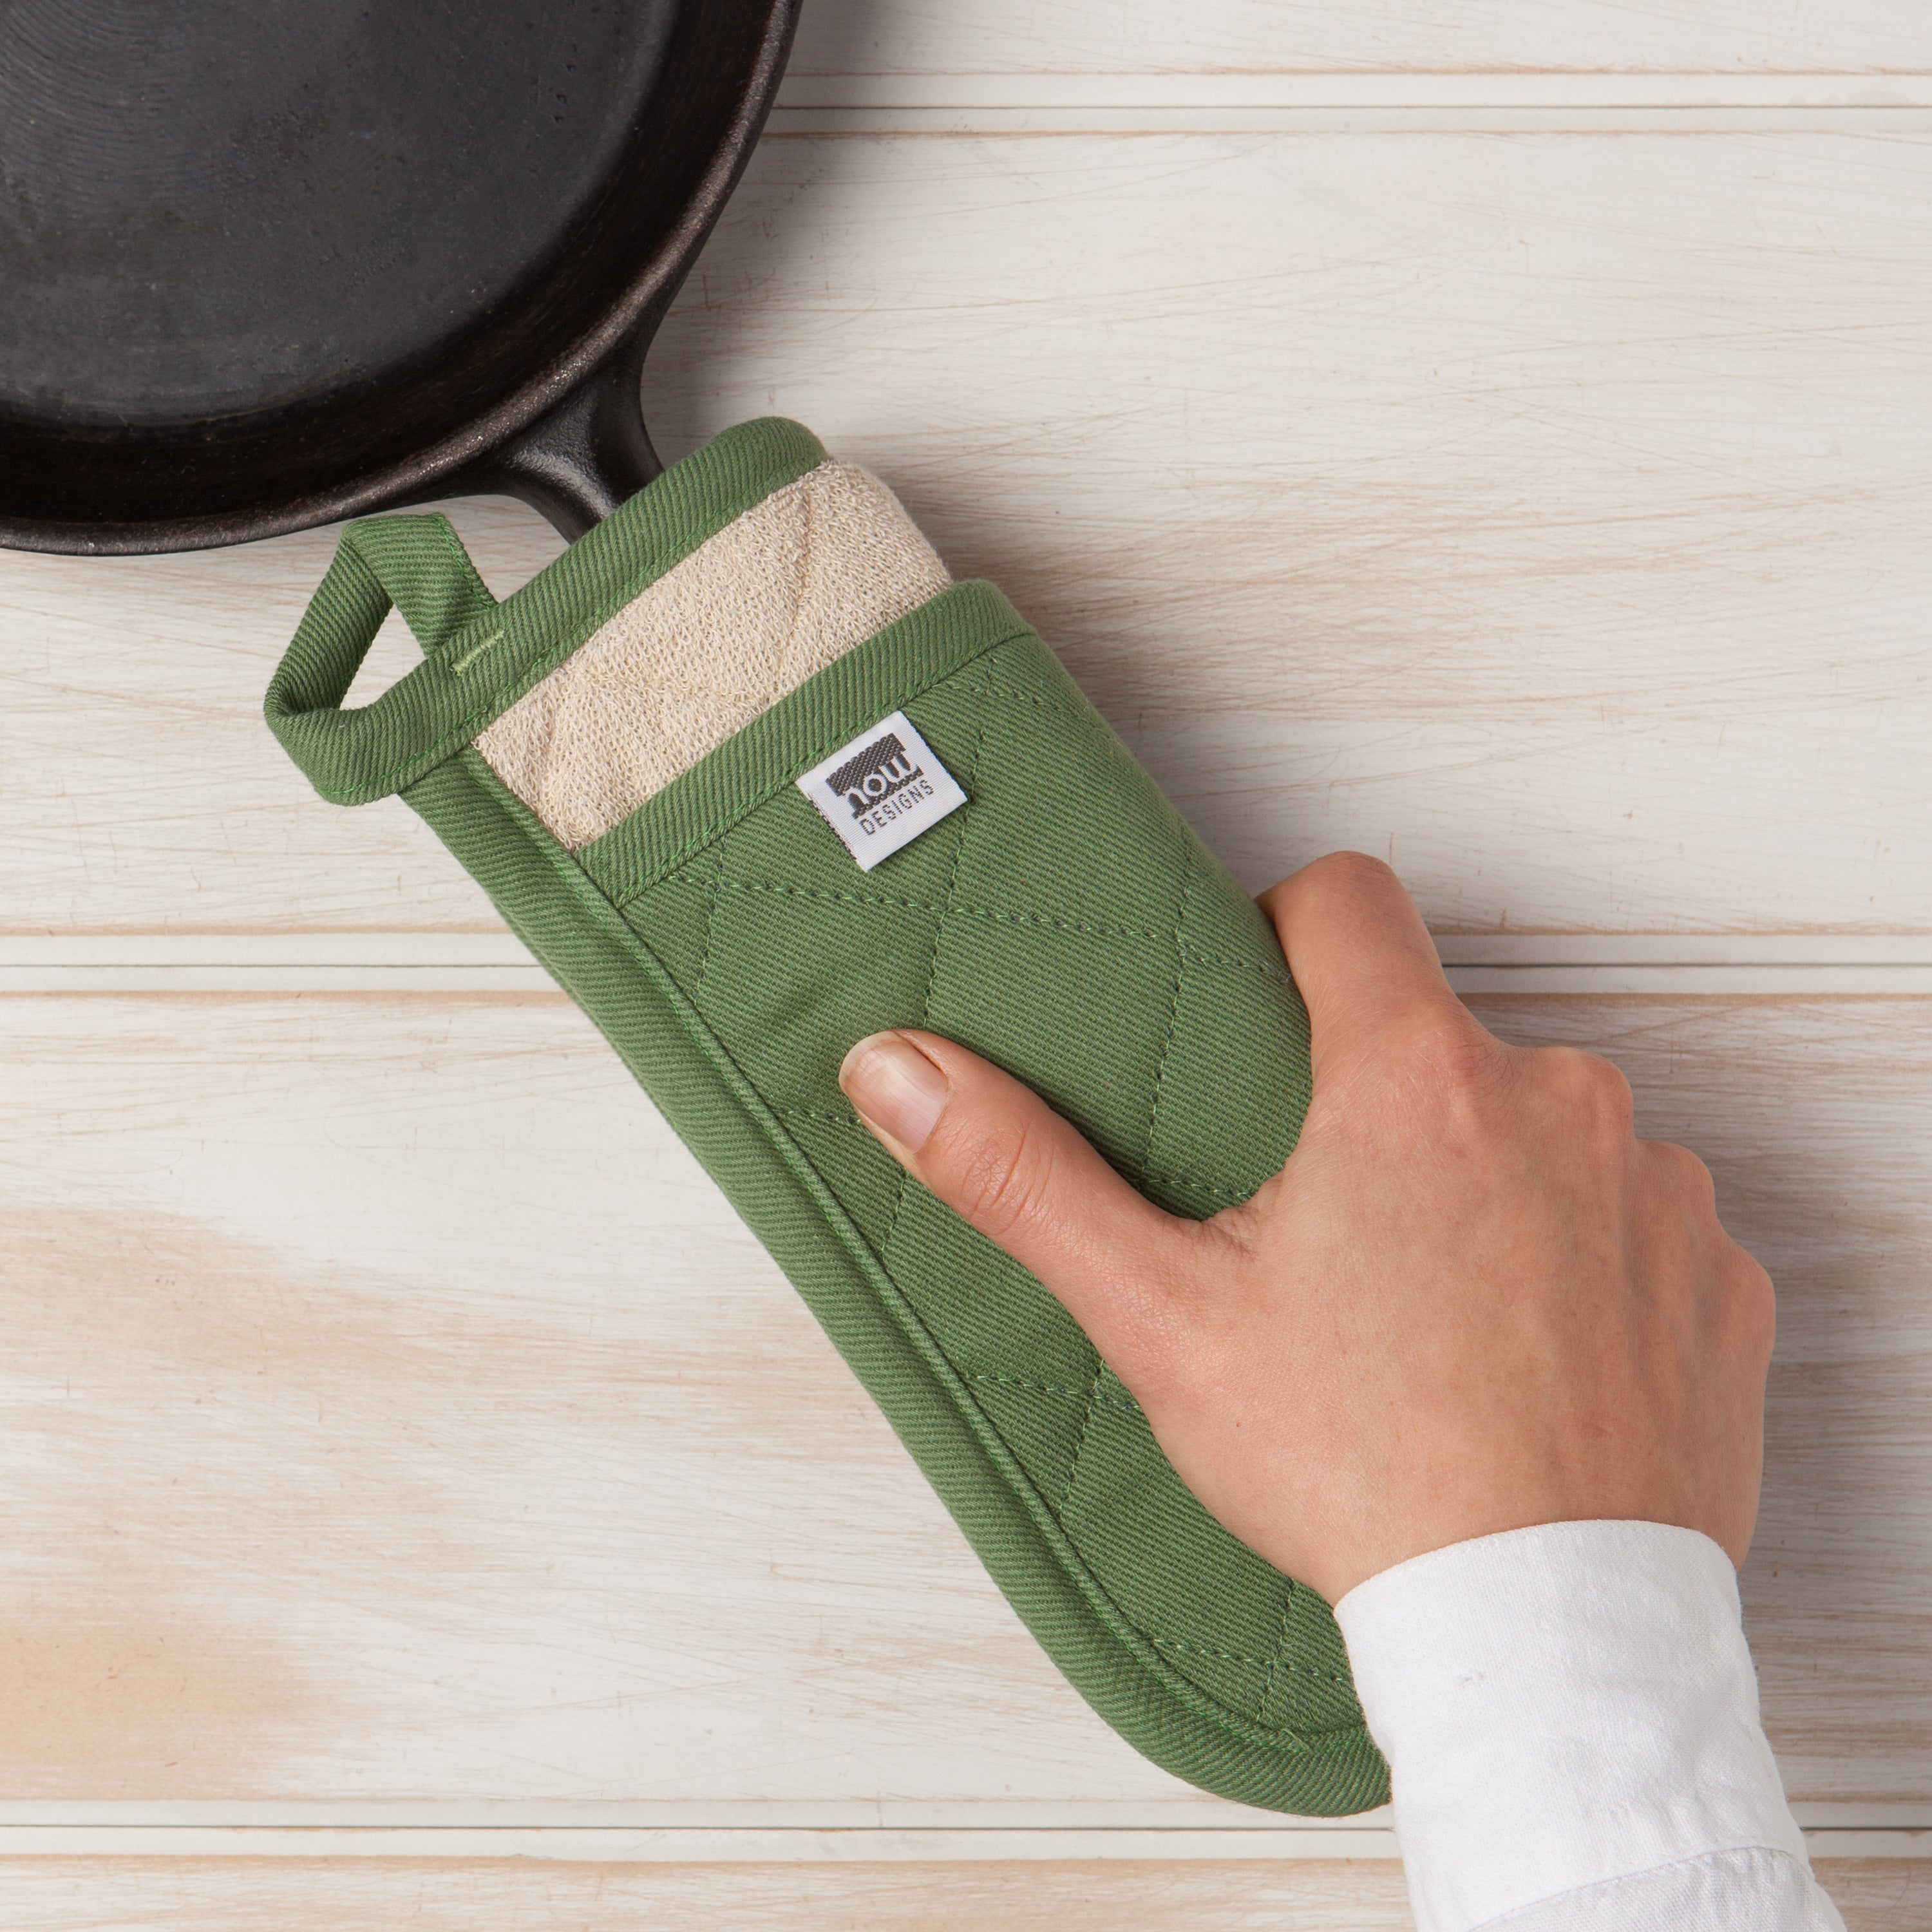 Elm Green - Superior Potholders by Now Designs®